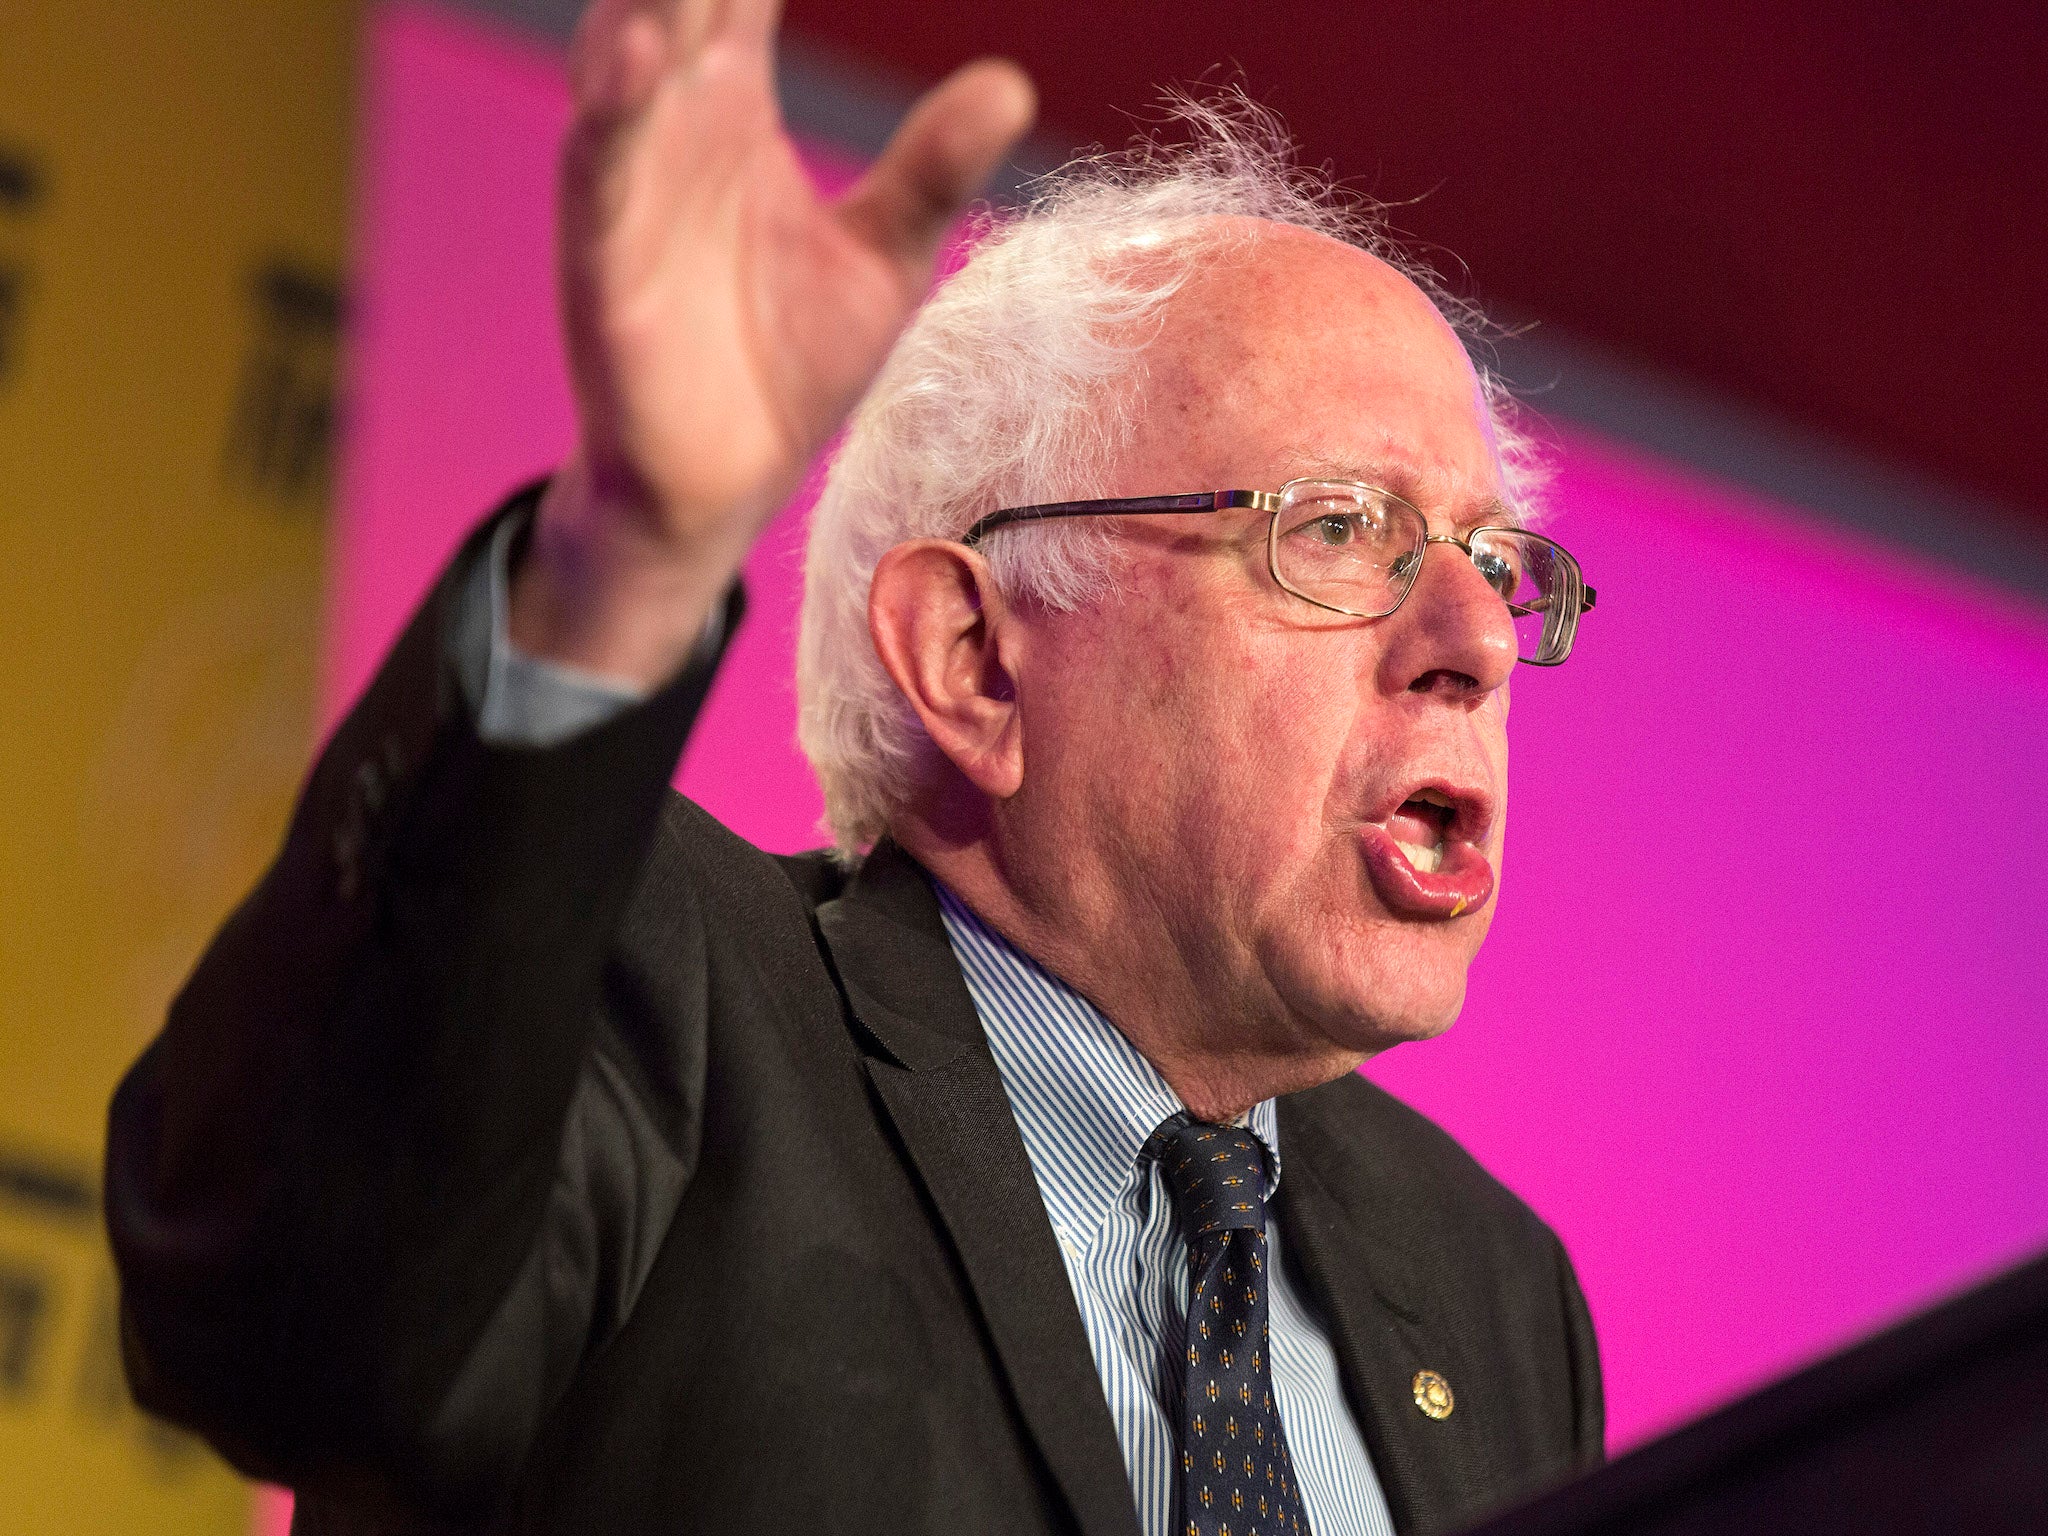 Bernie Sanders is expected to make an official announcement later this week